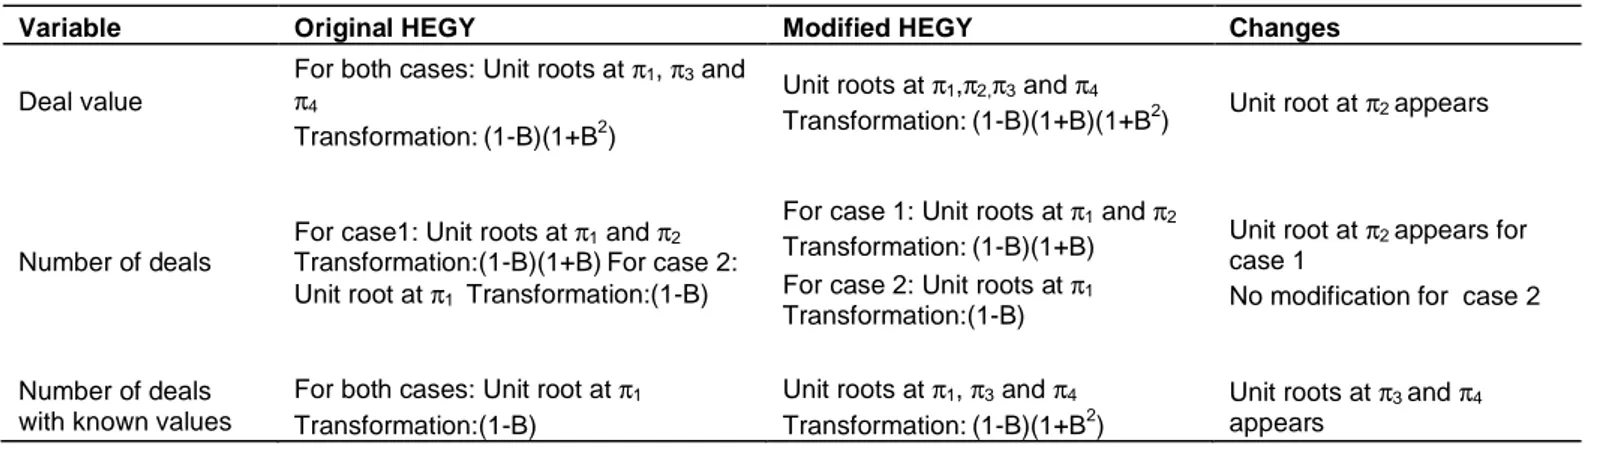 Table 1. Comparison of original HEGY and modified HEGY test results.     